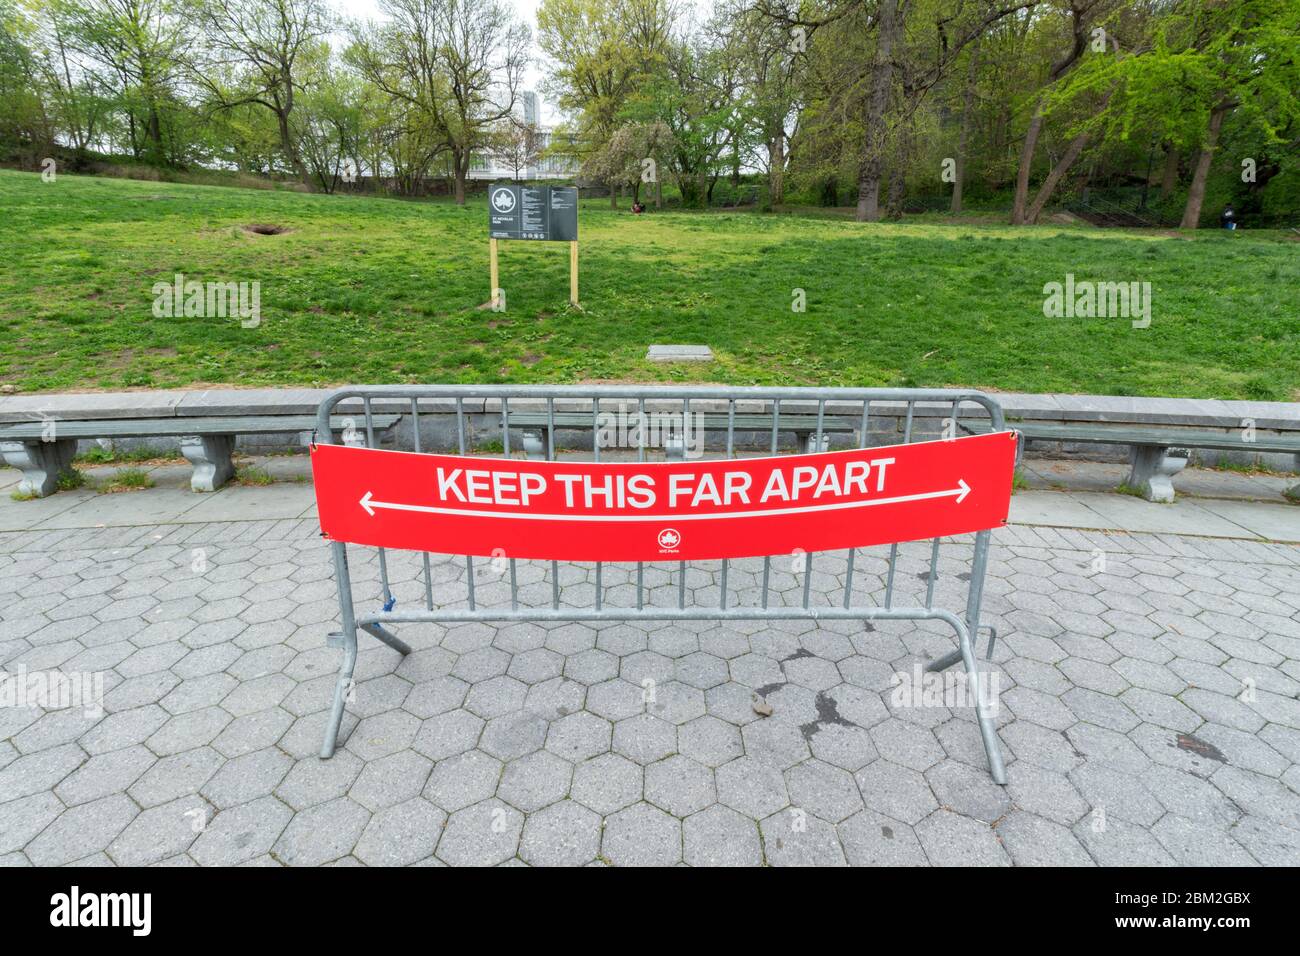 sign in parks stating keep this far apart, measuring six feet to guide social distancing when outdoors due to the coronavirus or covid-19 pandemic Stock Photo